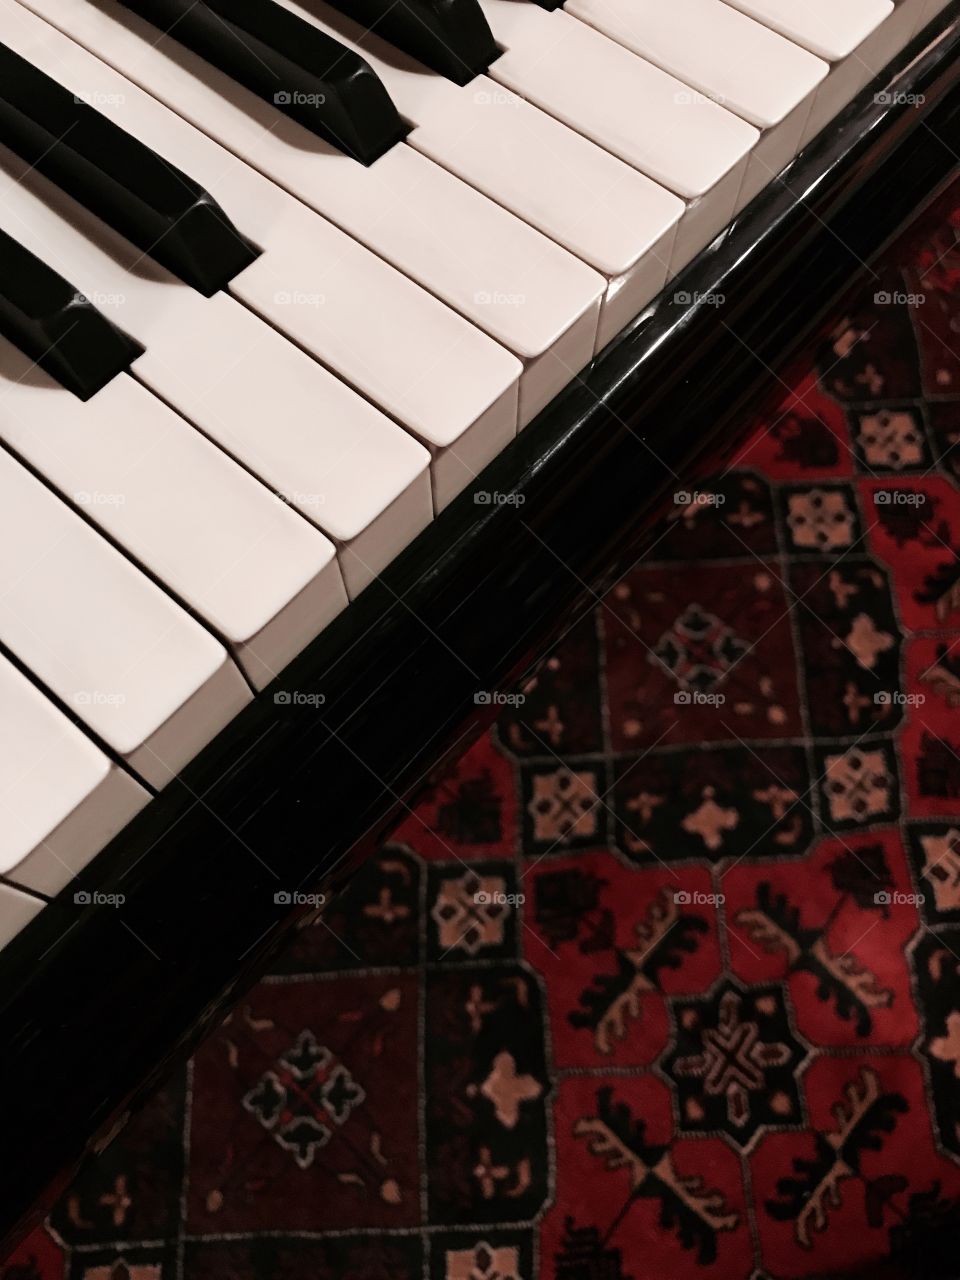 Piano keys over a red Persian rug